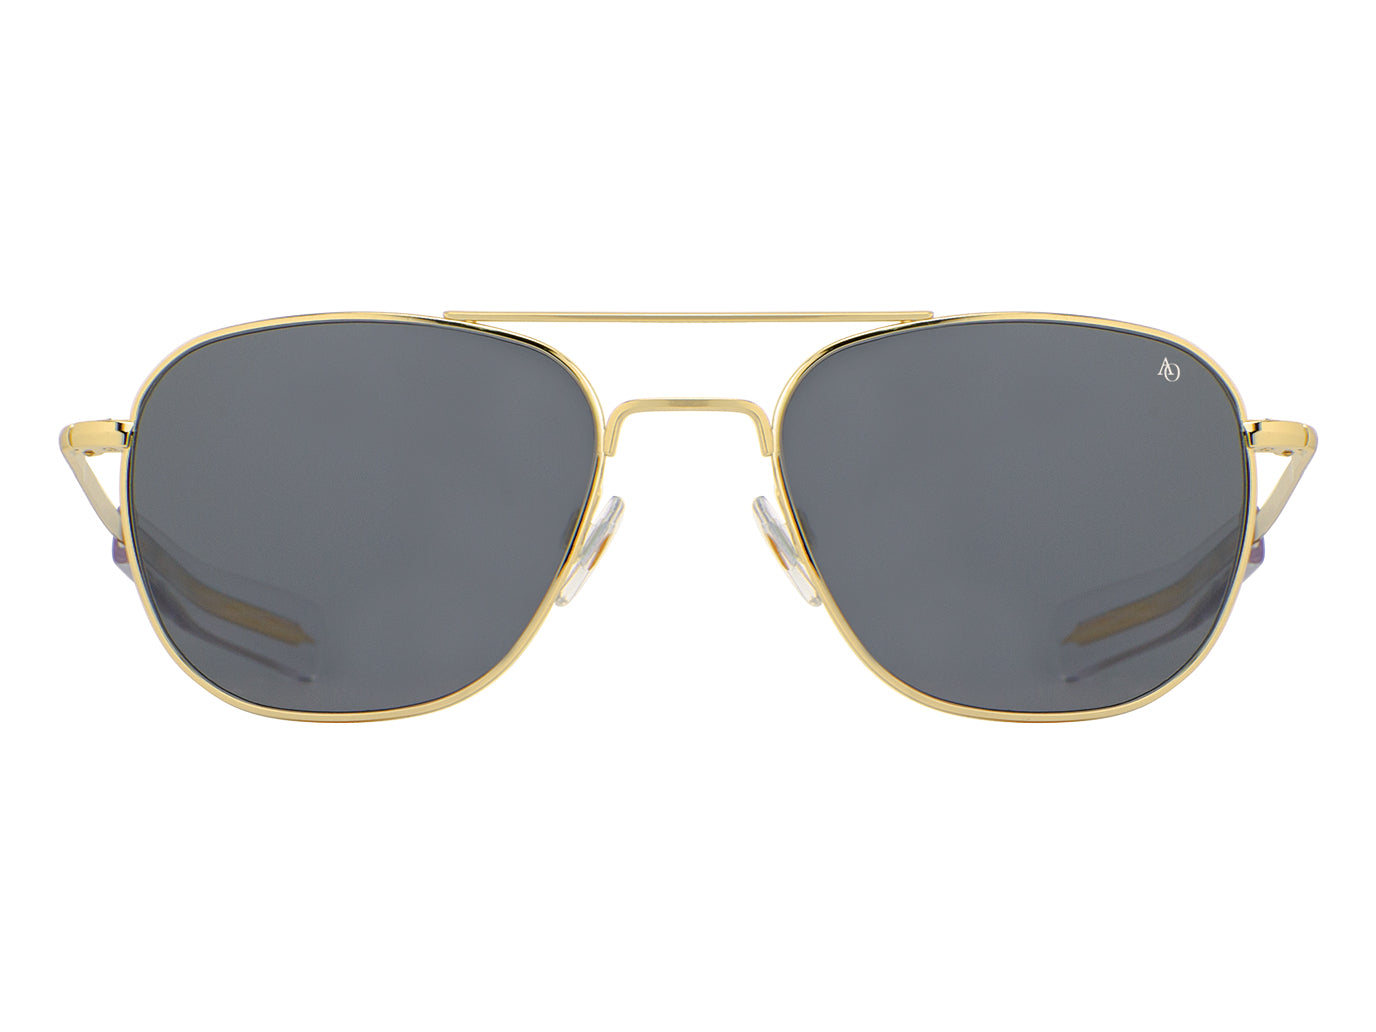 Front view of gold American Optical Original Pilot navigator sunglasses with non-polarised grey glass lens